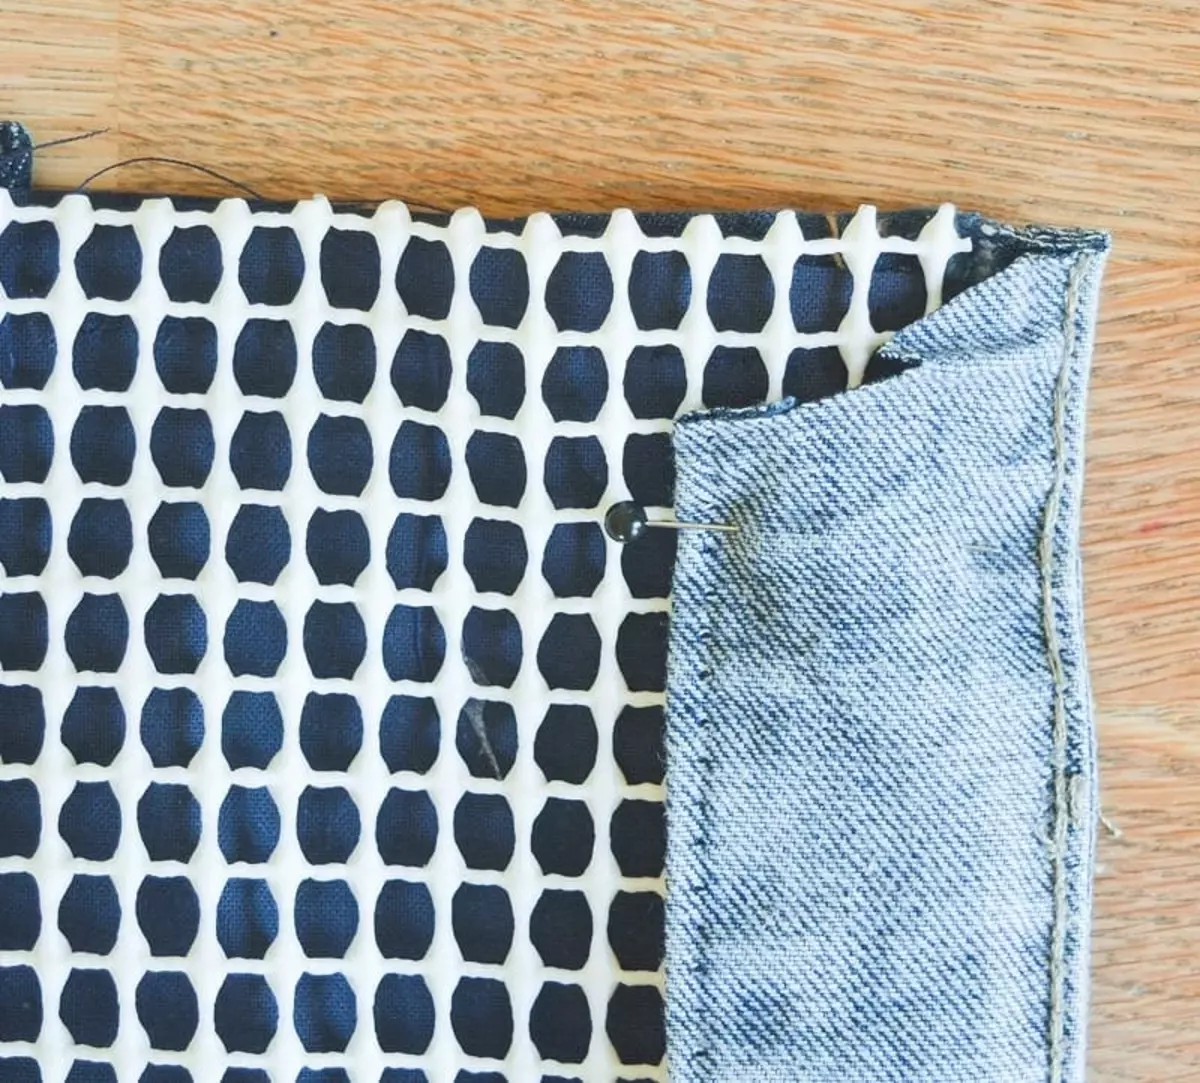 Idea: a rug from pockets of old jeans